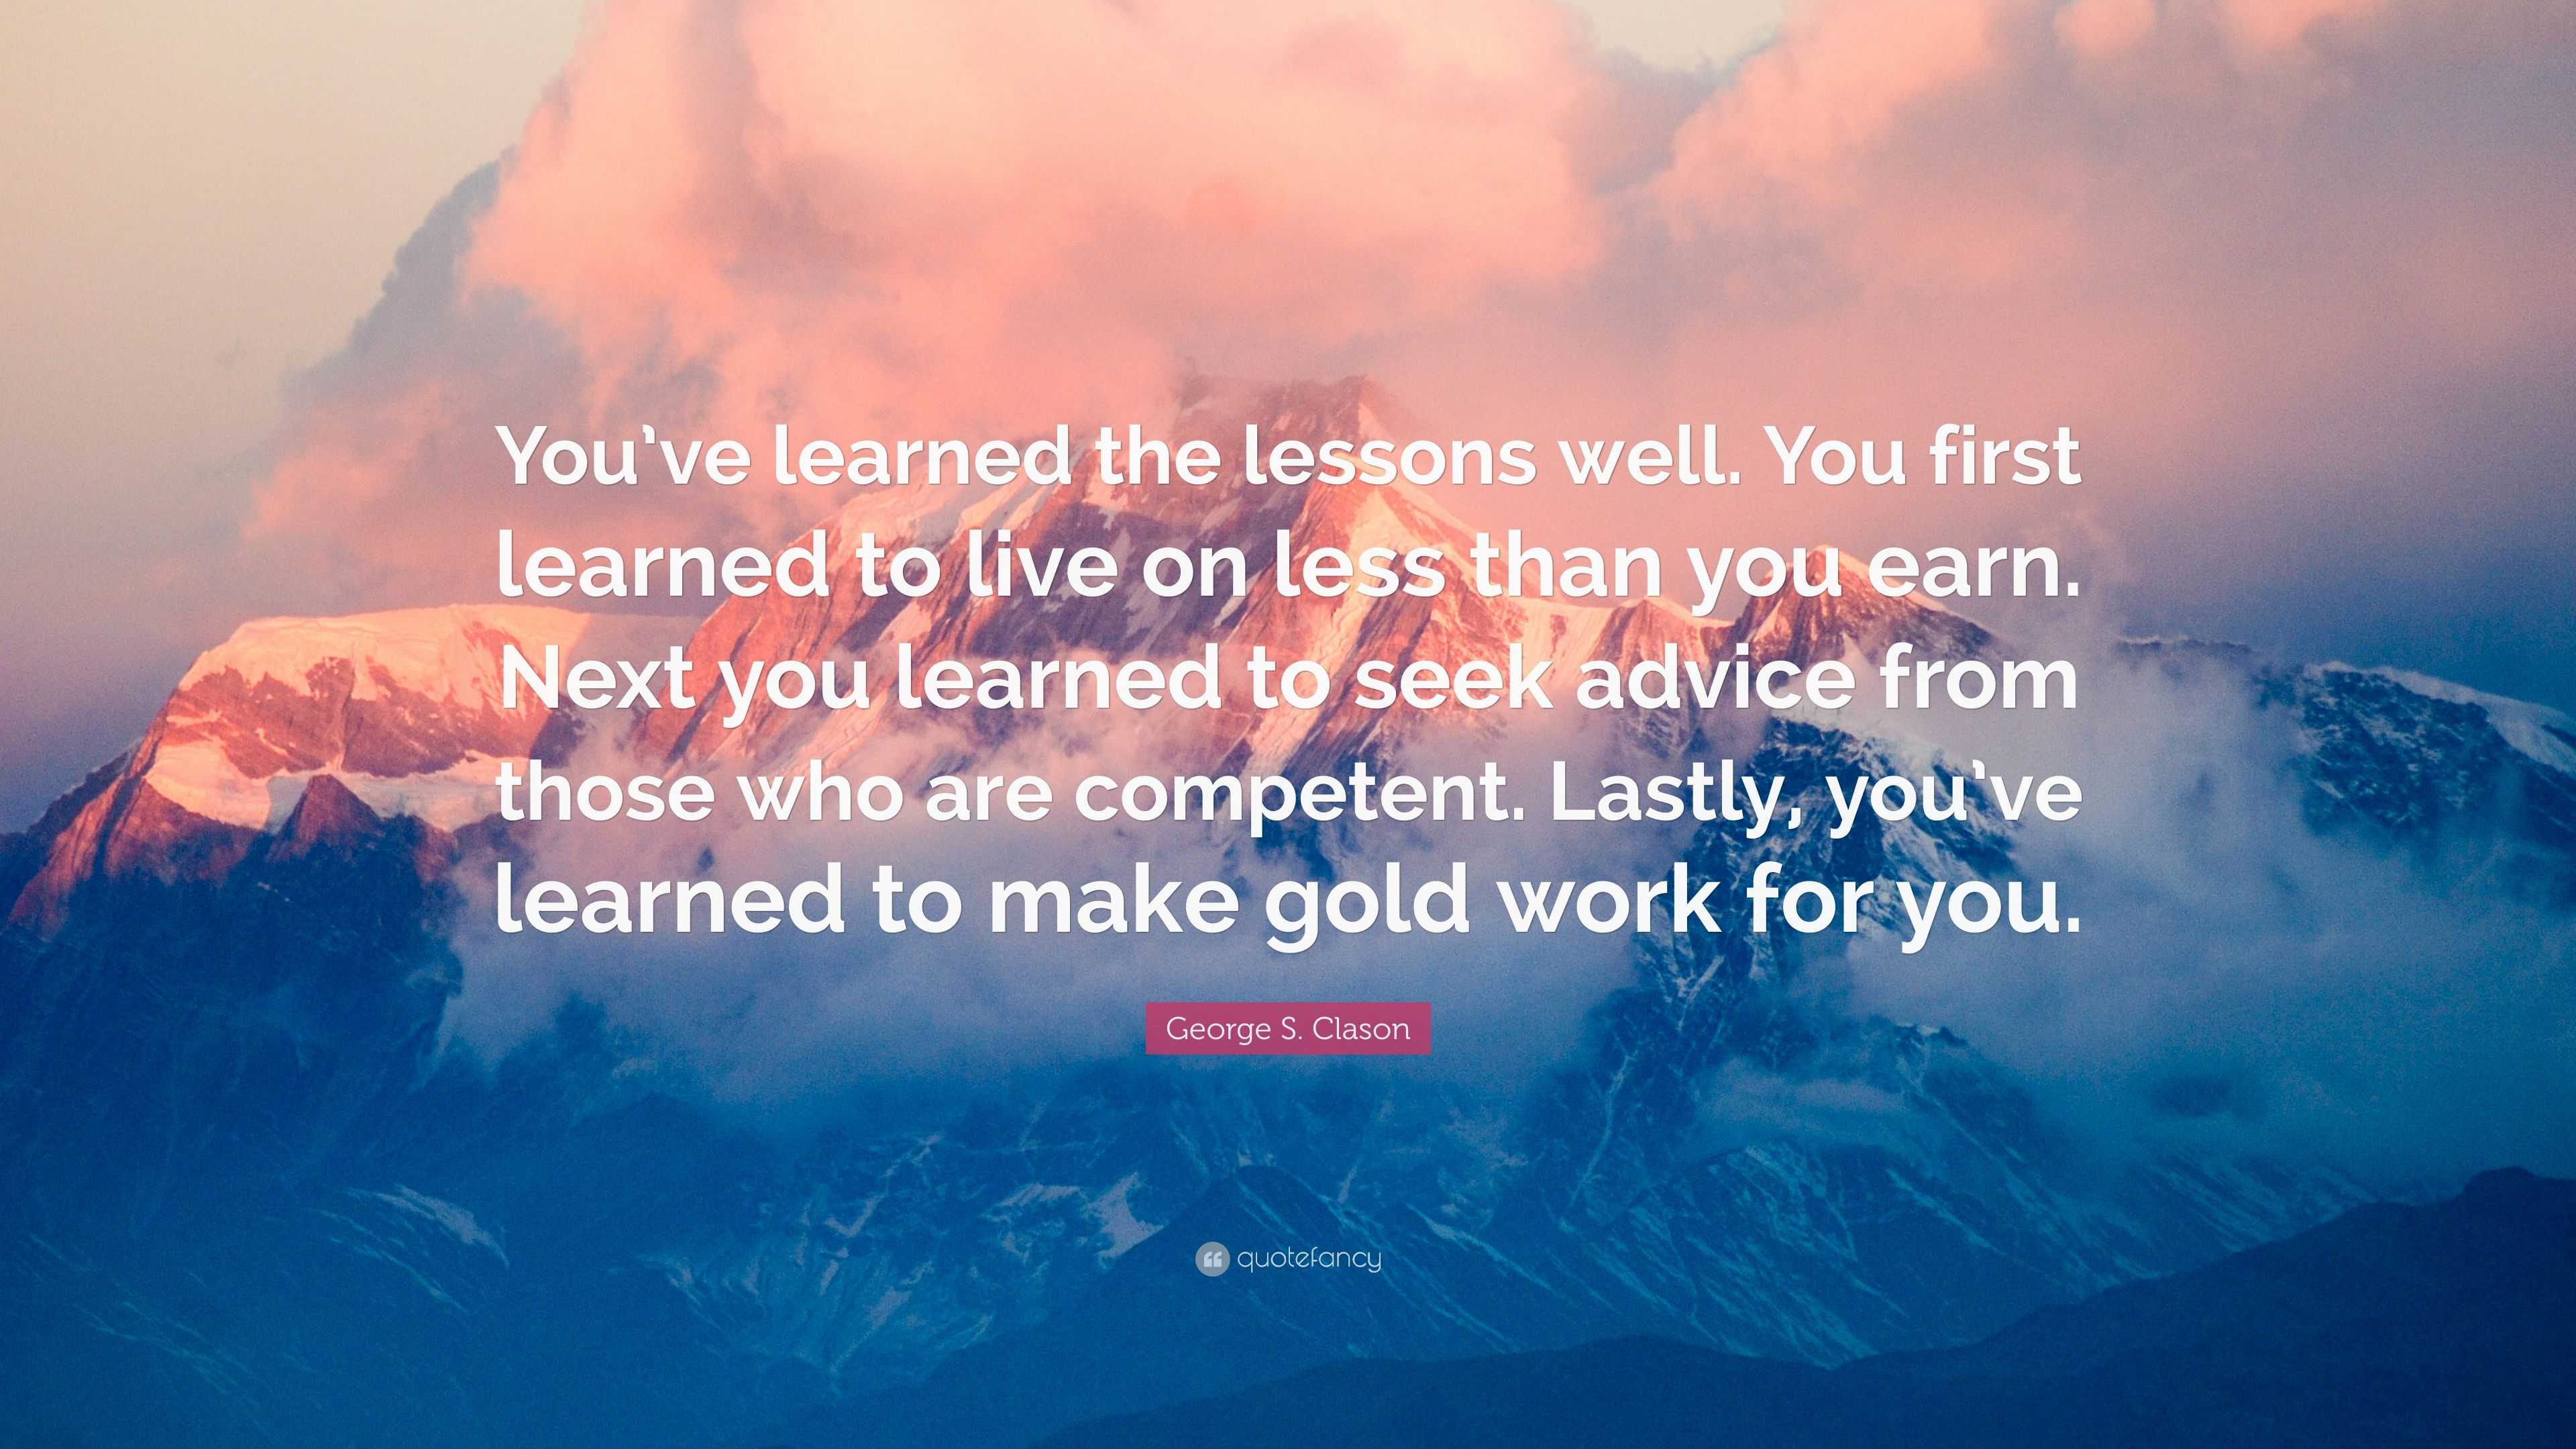 Seek the lessons to be learned